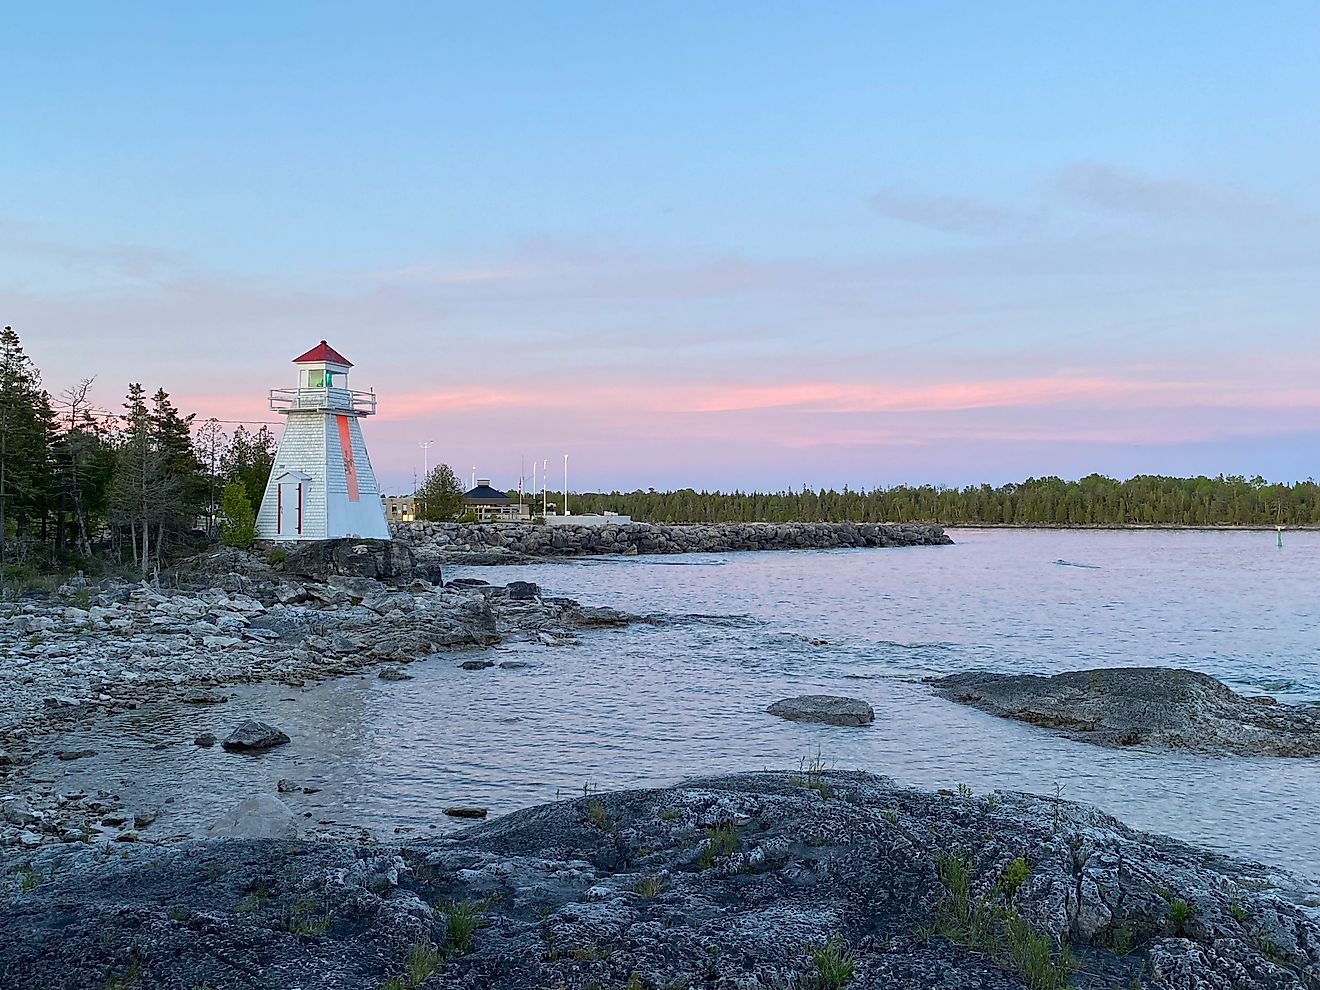 A rustic lighthouse welcomes boats to the south side of Manitoulin Island. A pink, post-sunset sky compliments the rocky Niagara Escarpment and deciduous trees